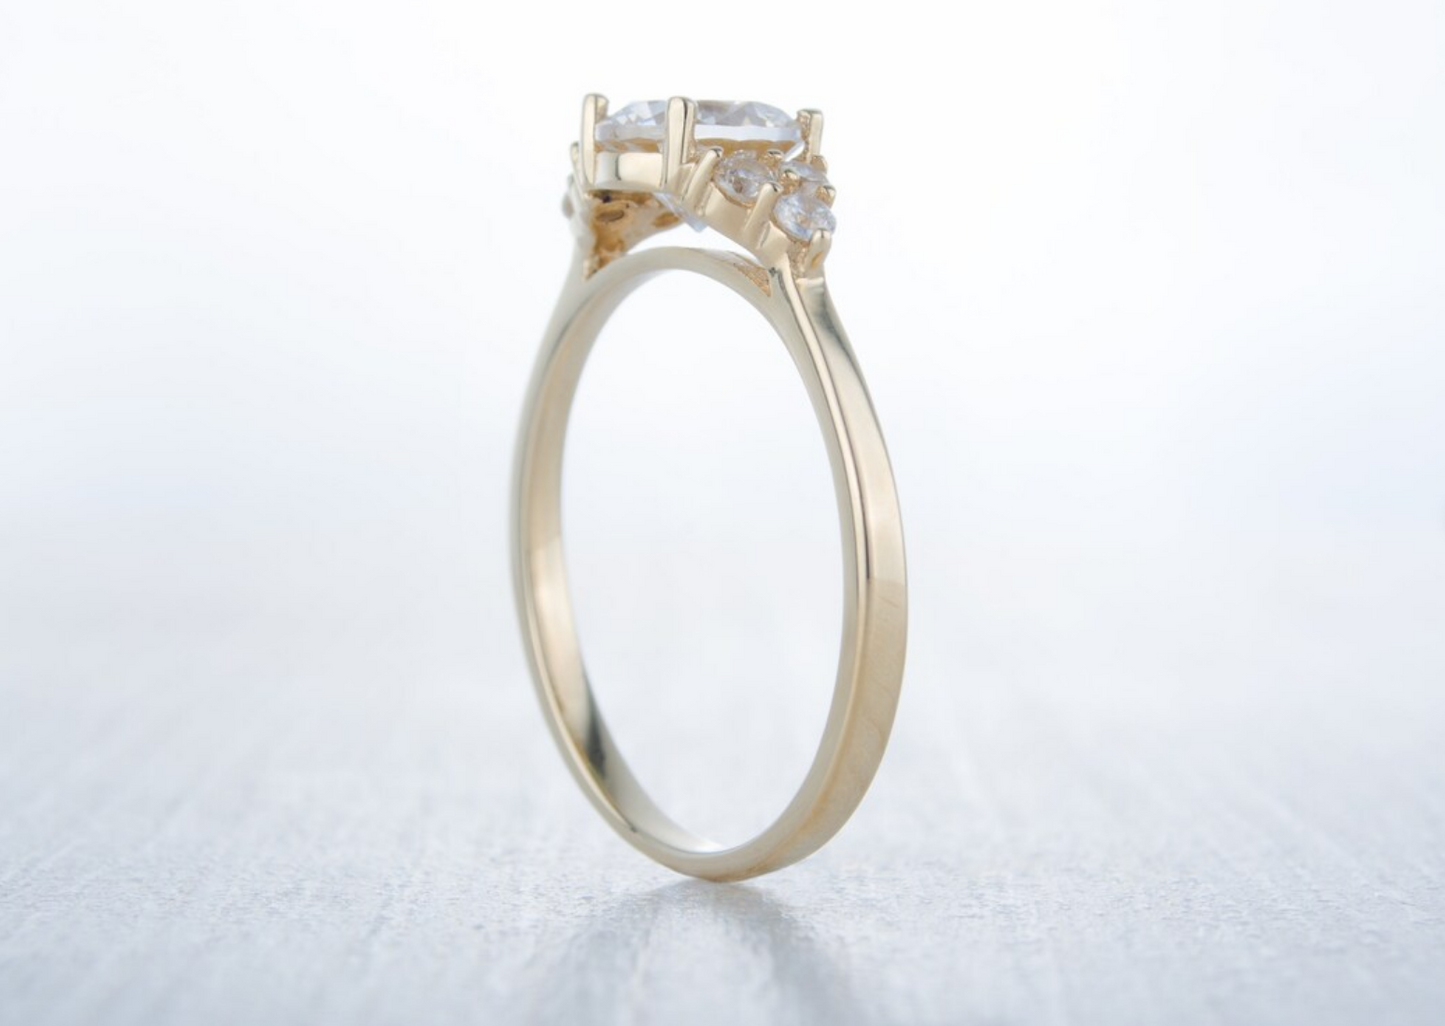 Size UK O / US 7 10K Solid Yellow Gold and Simulated Diamond Engagement ring.